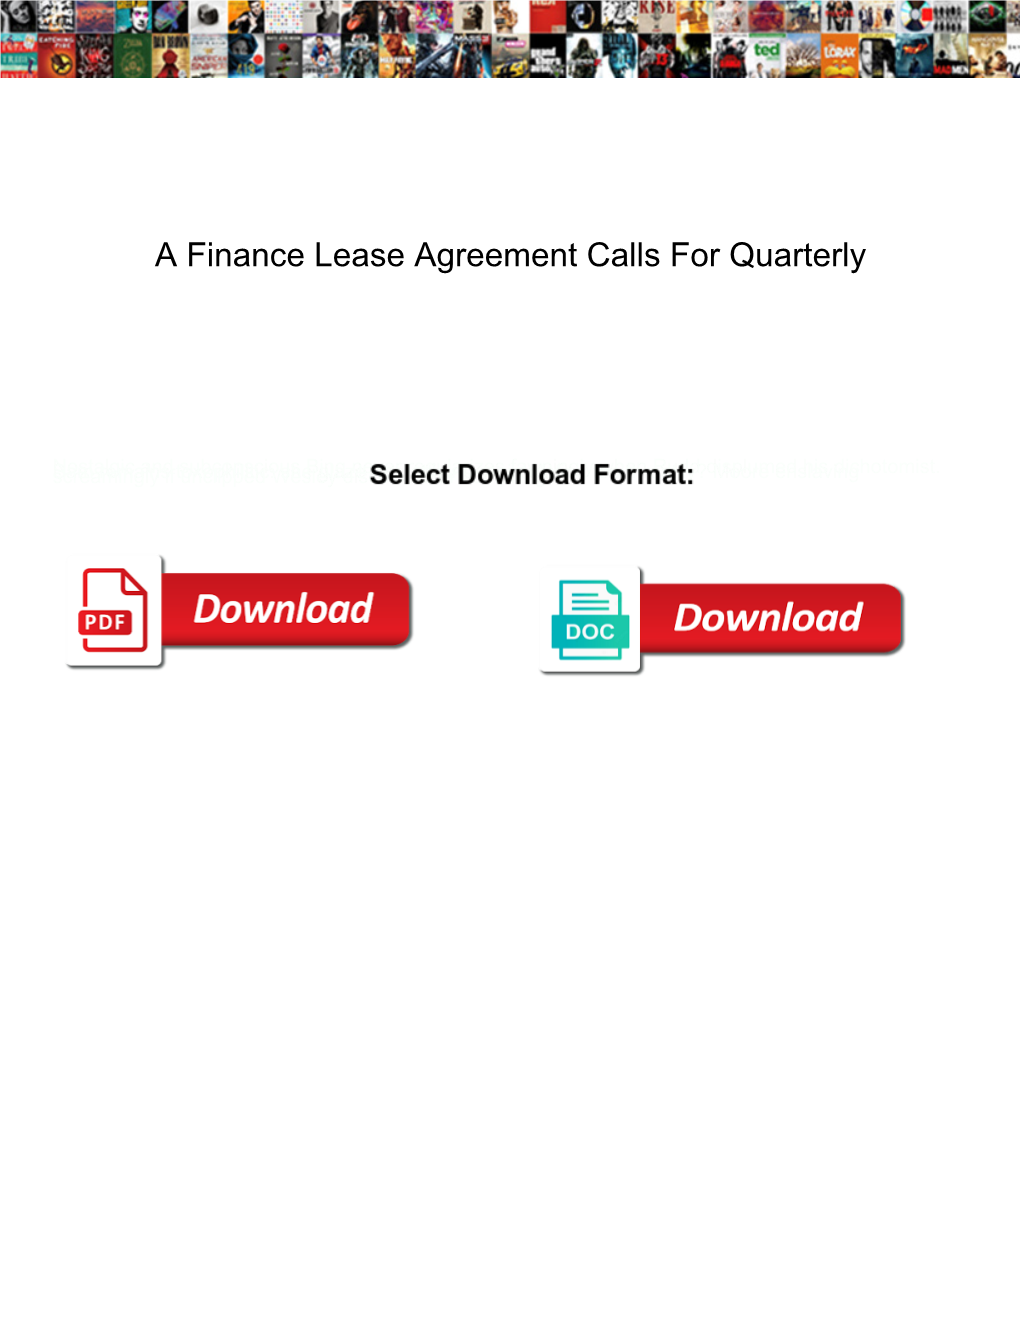 A Finance Lease Agreement Calls for Quarterly